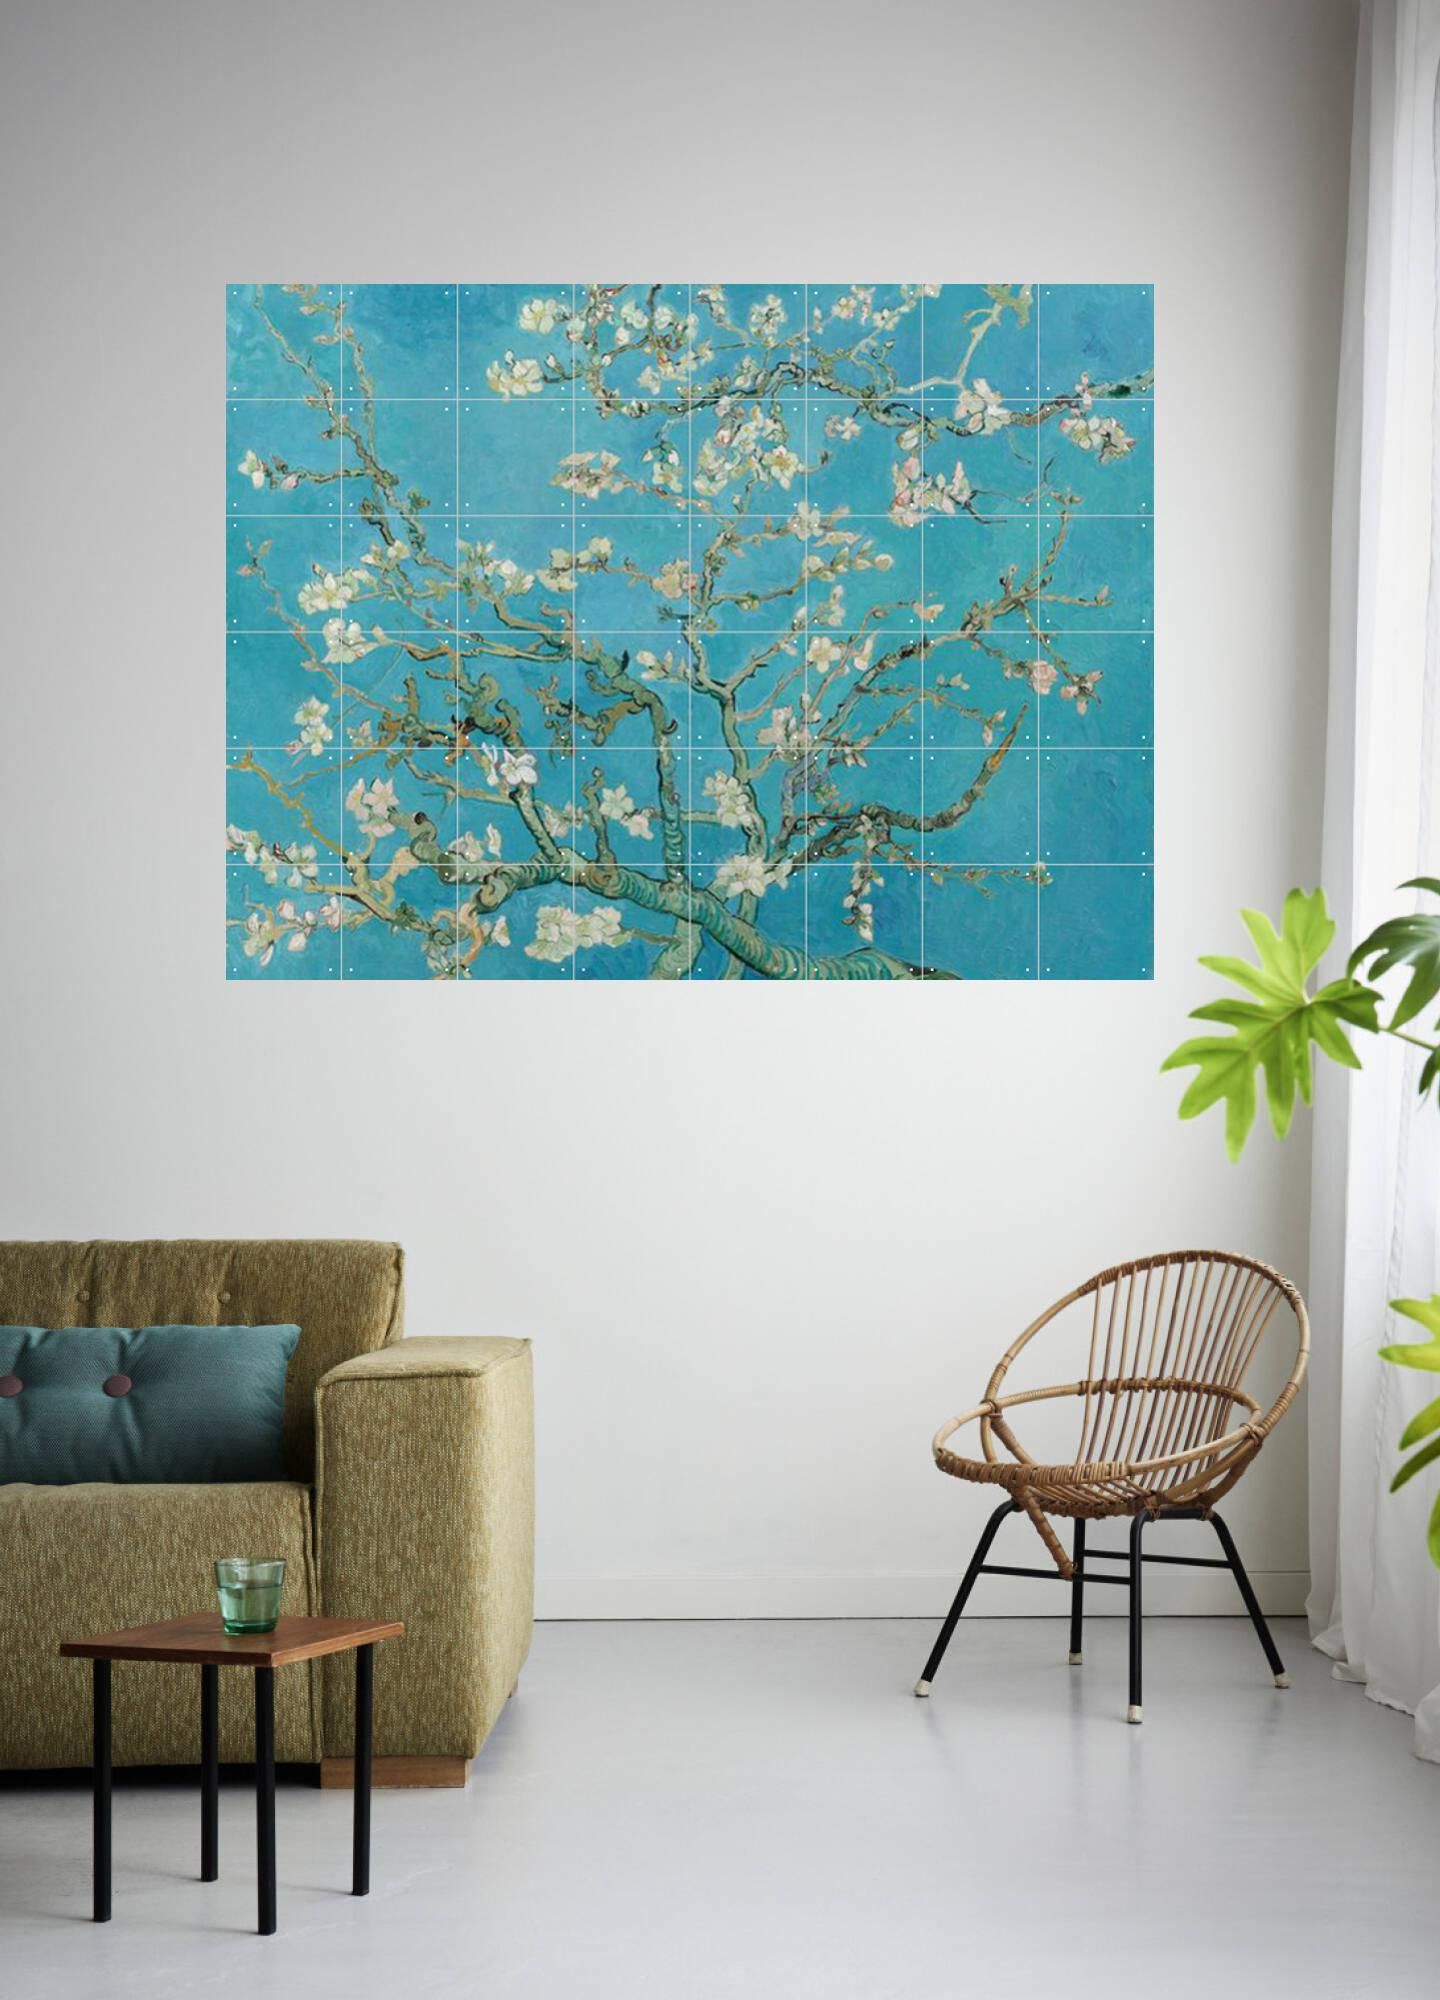 Almond Blossom – Ixxi Intended For Almond Blossoms Wall Art (View 11 of 15)